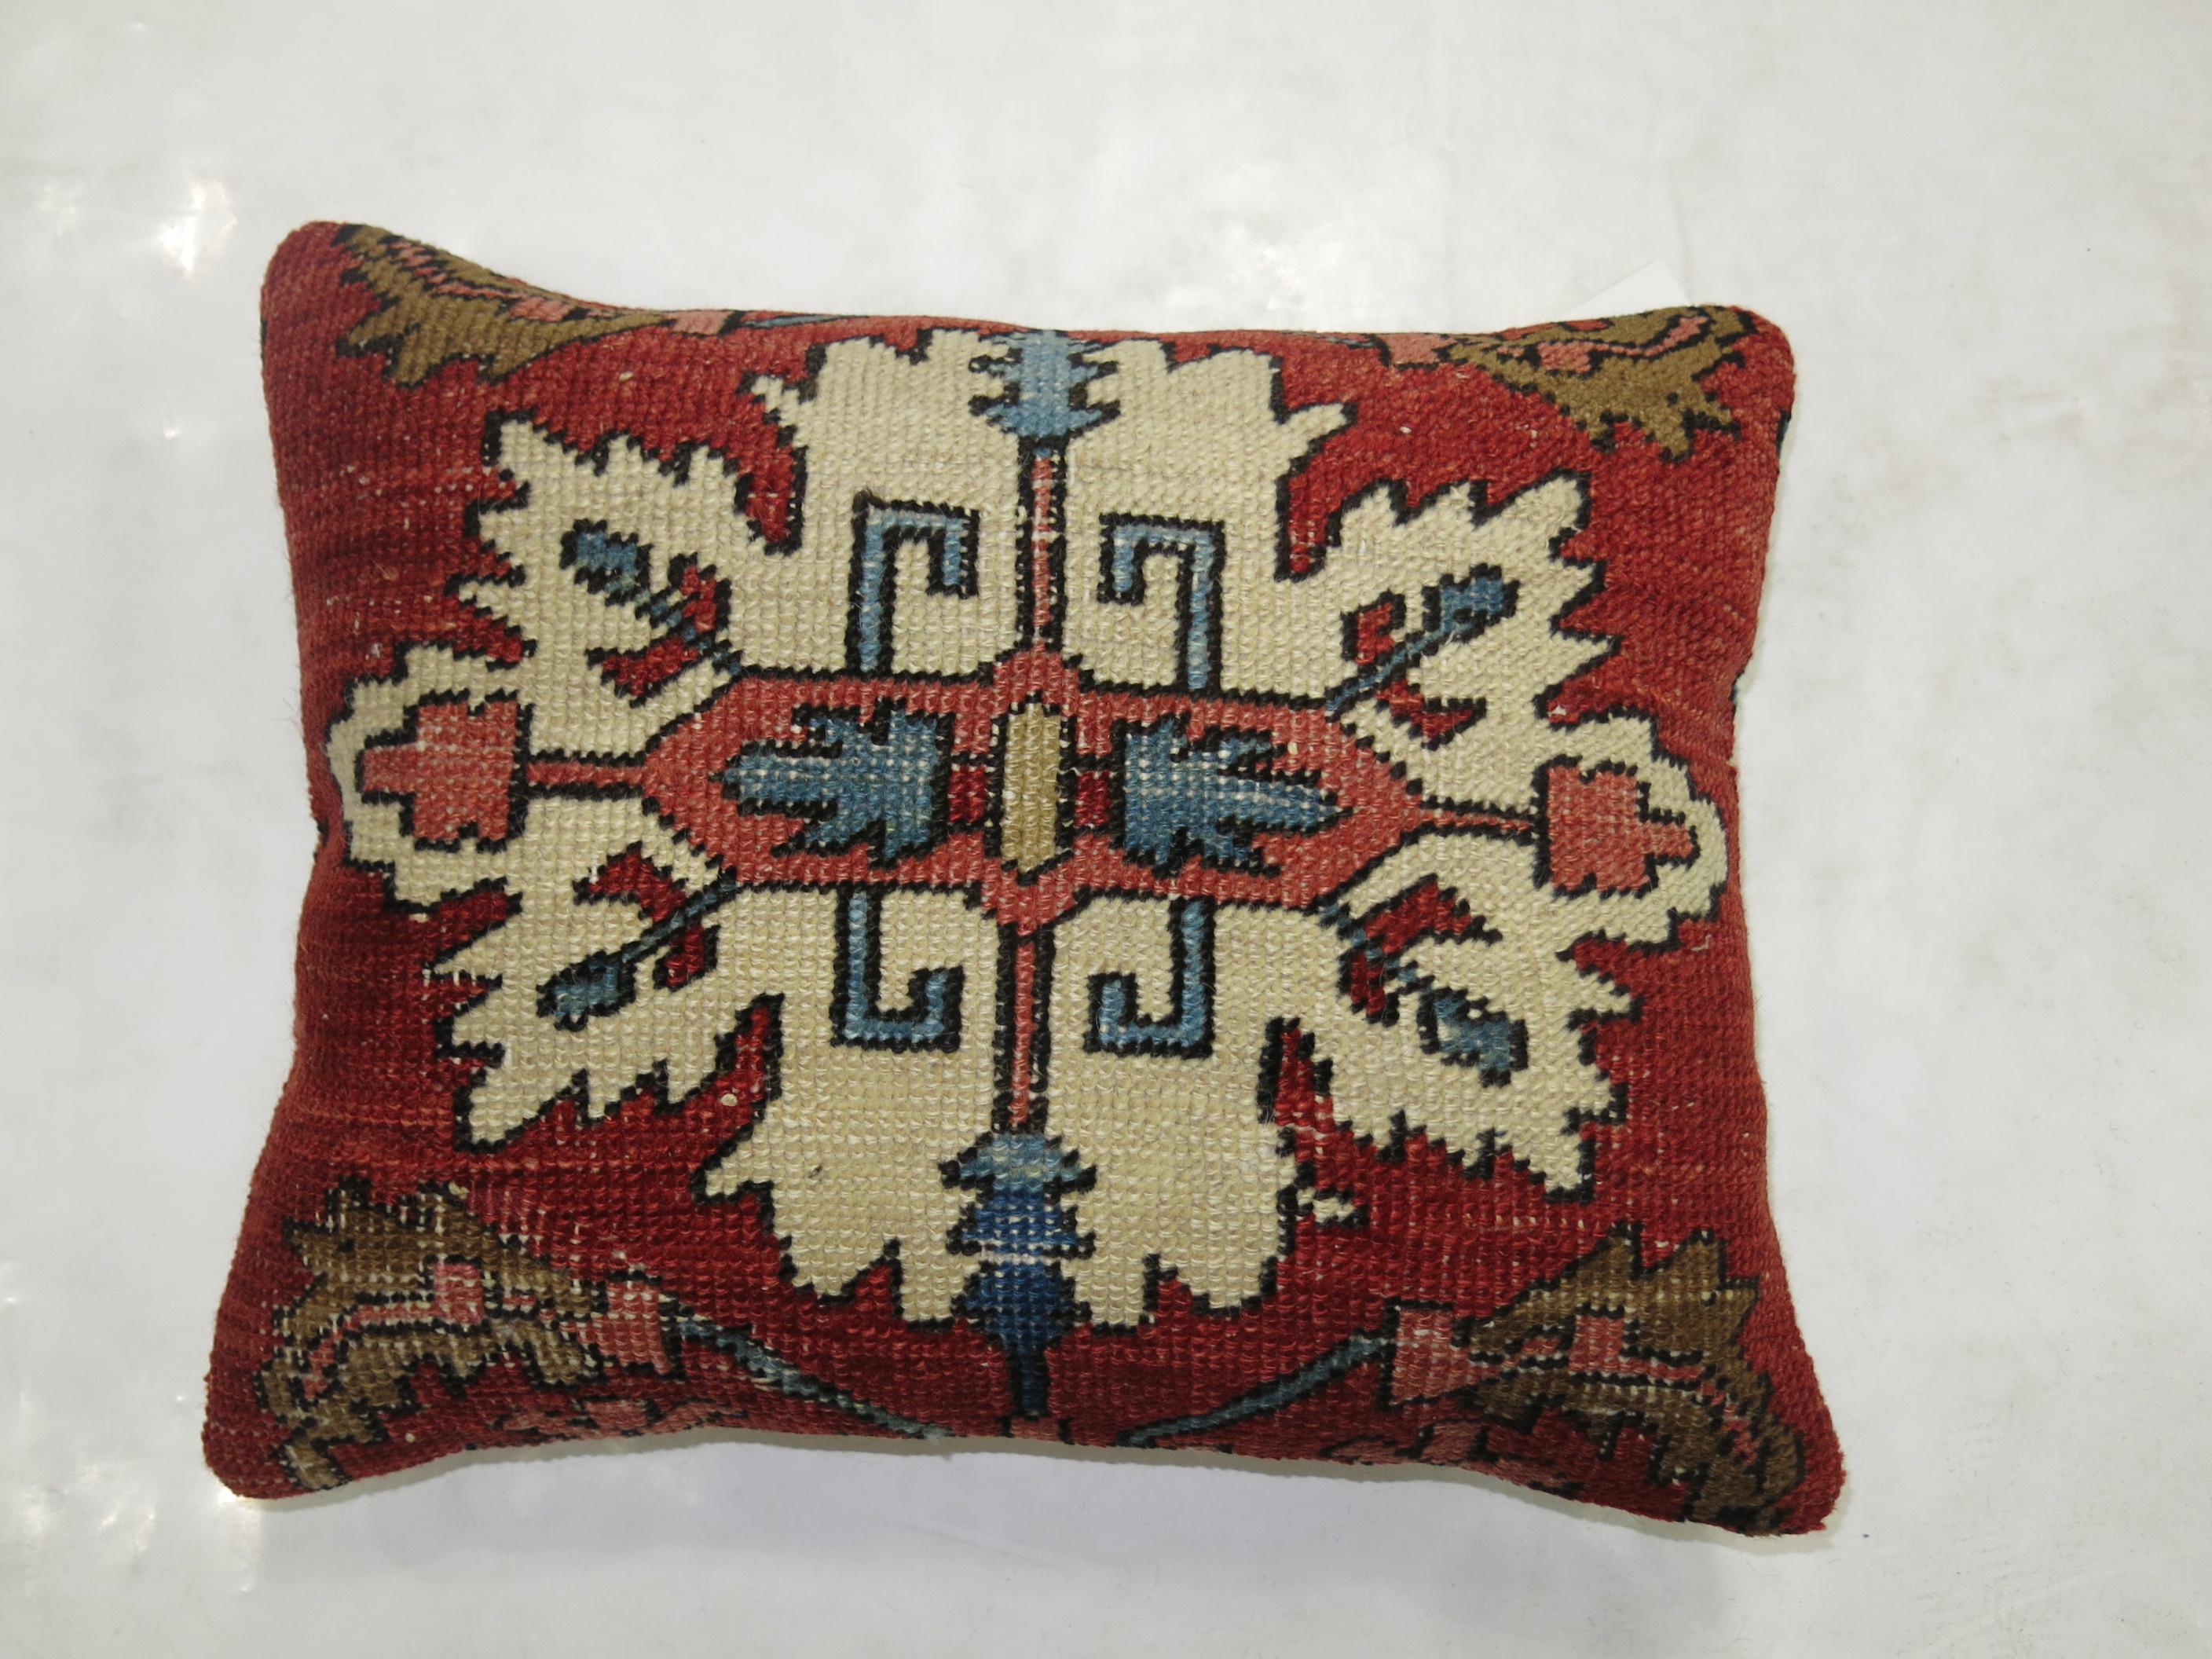 Pillow made from a fine quality Persian Serapi rug. Ivory Medallion with red brick , blue and brown accents

Measures: 15